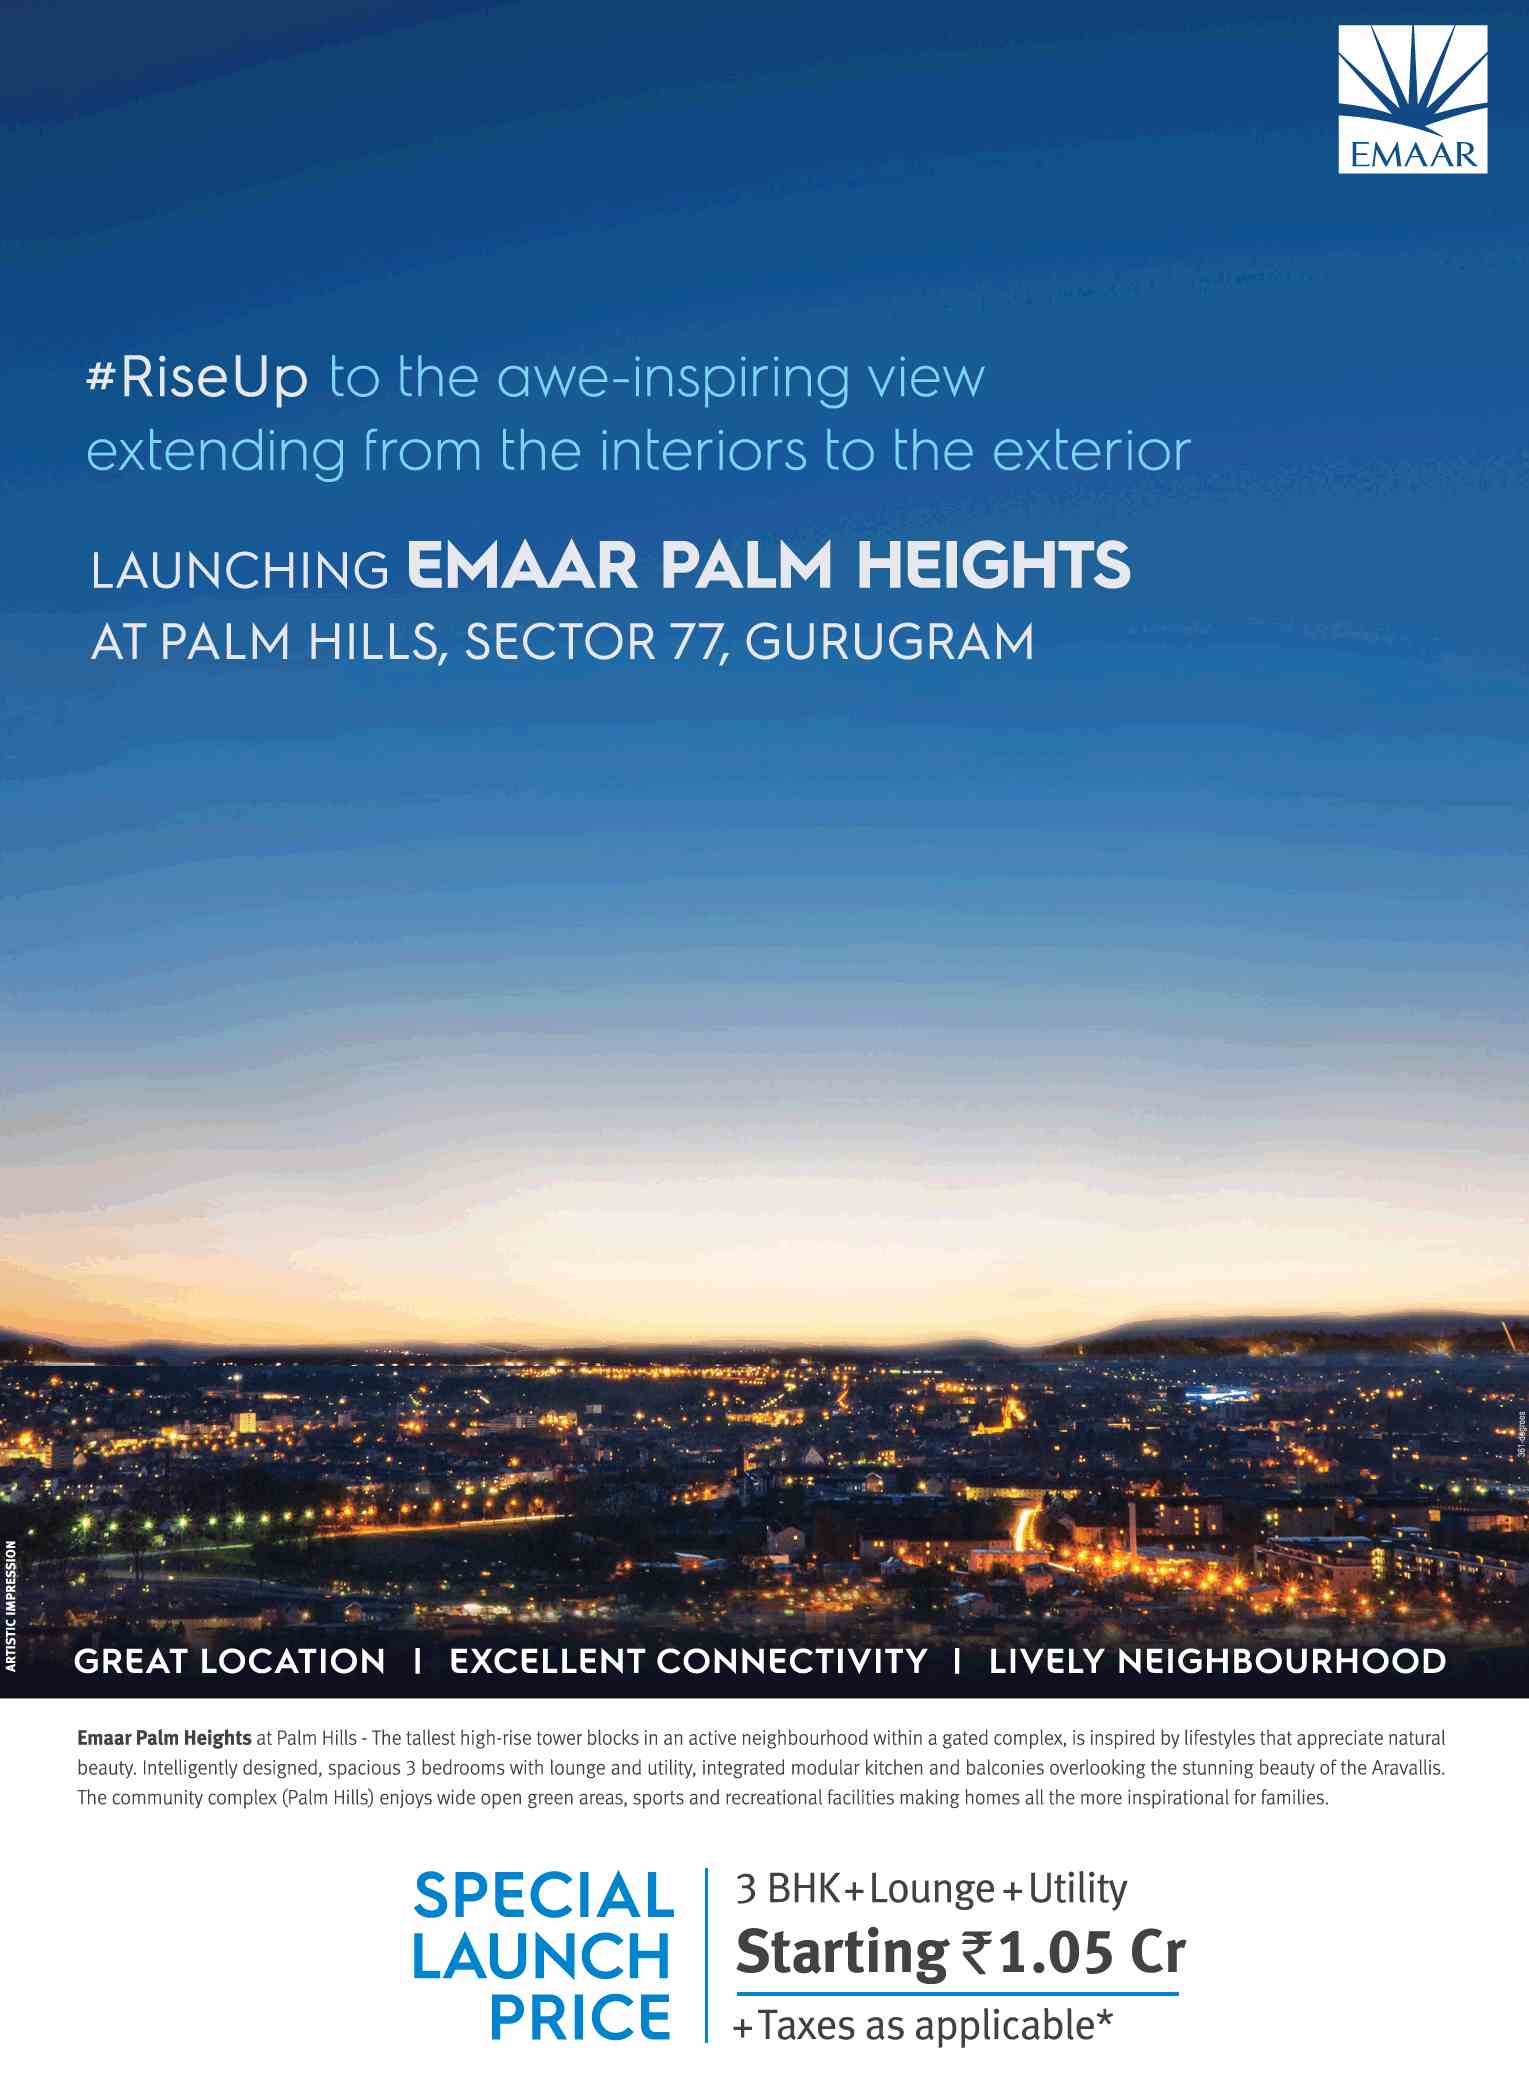 Launching Emaar Palm Heights at Palm Hills in Sector 77, Gurgaon Update